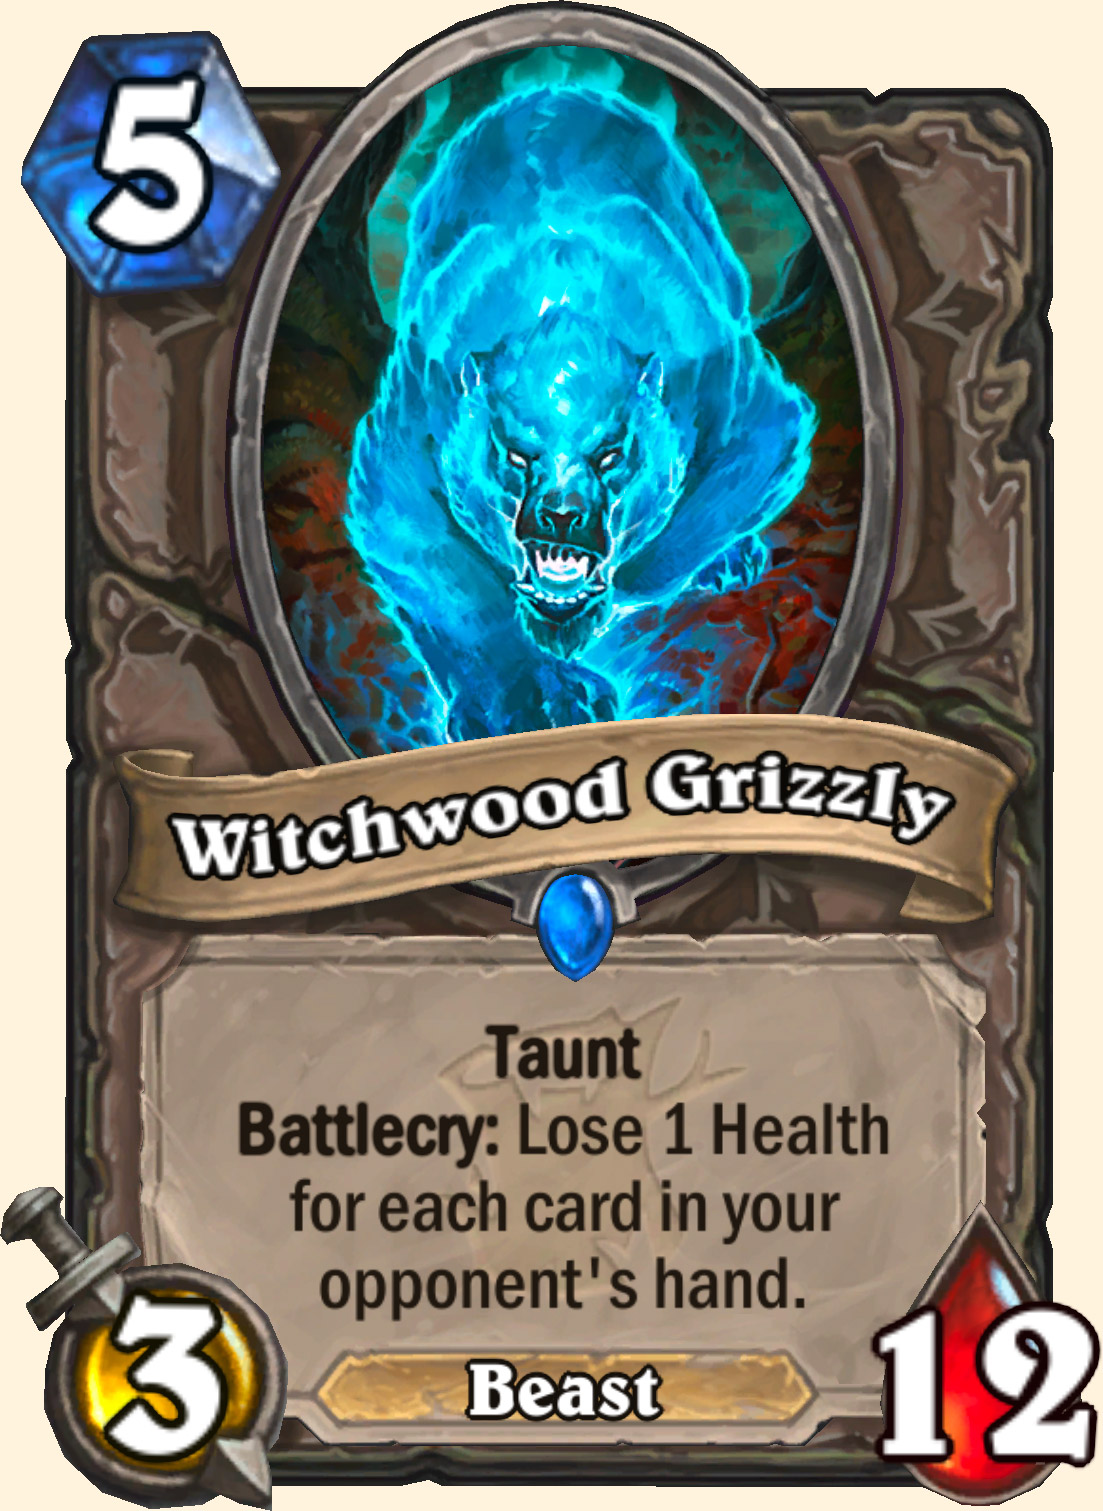 witchwood-grizzly-hearthstone-card.jpg